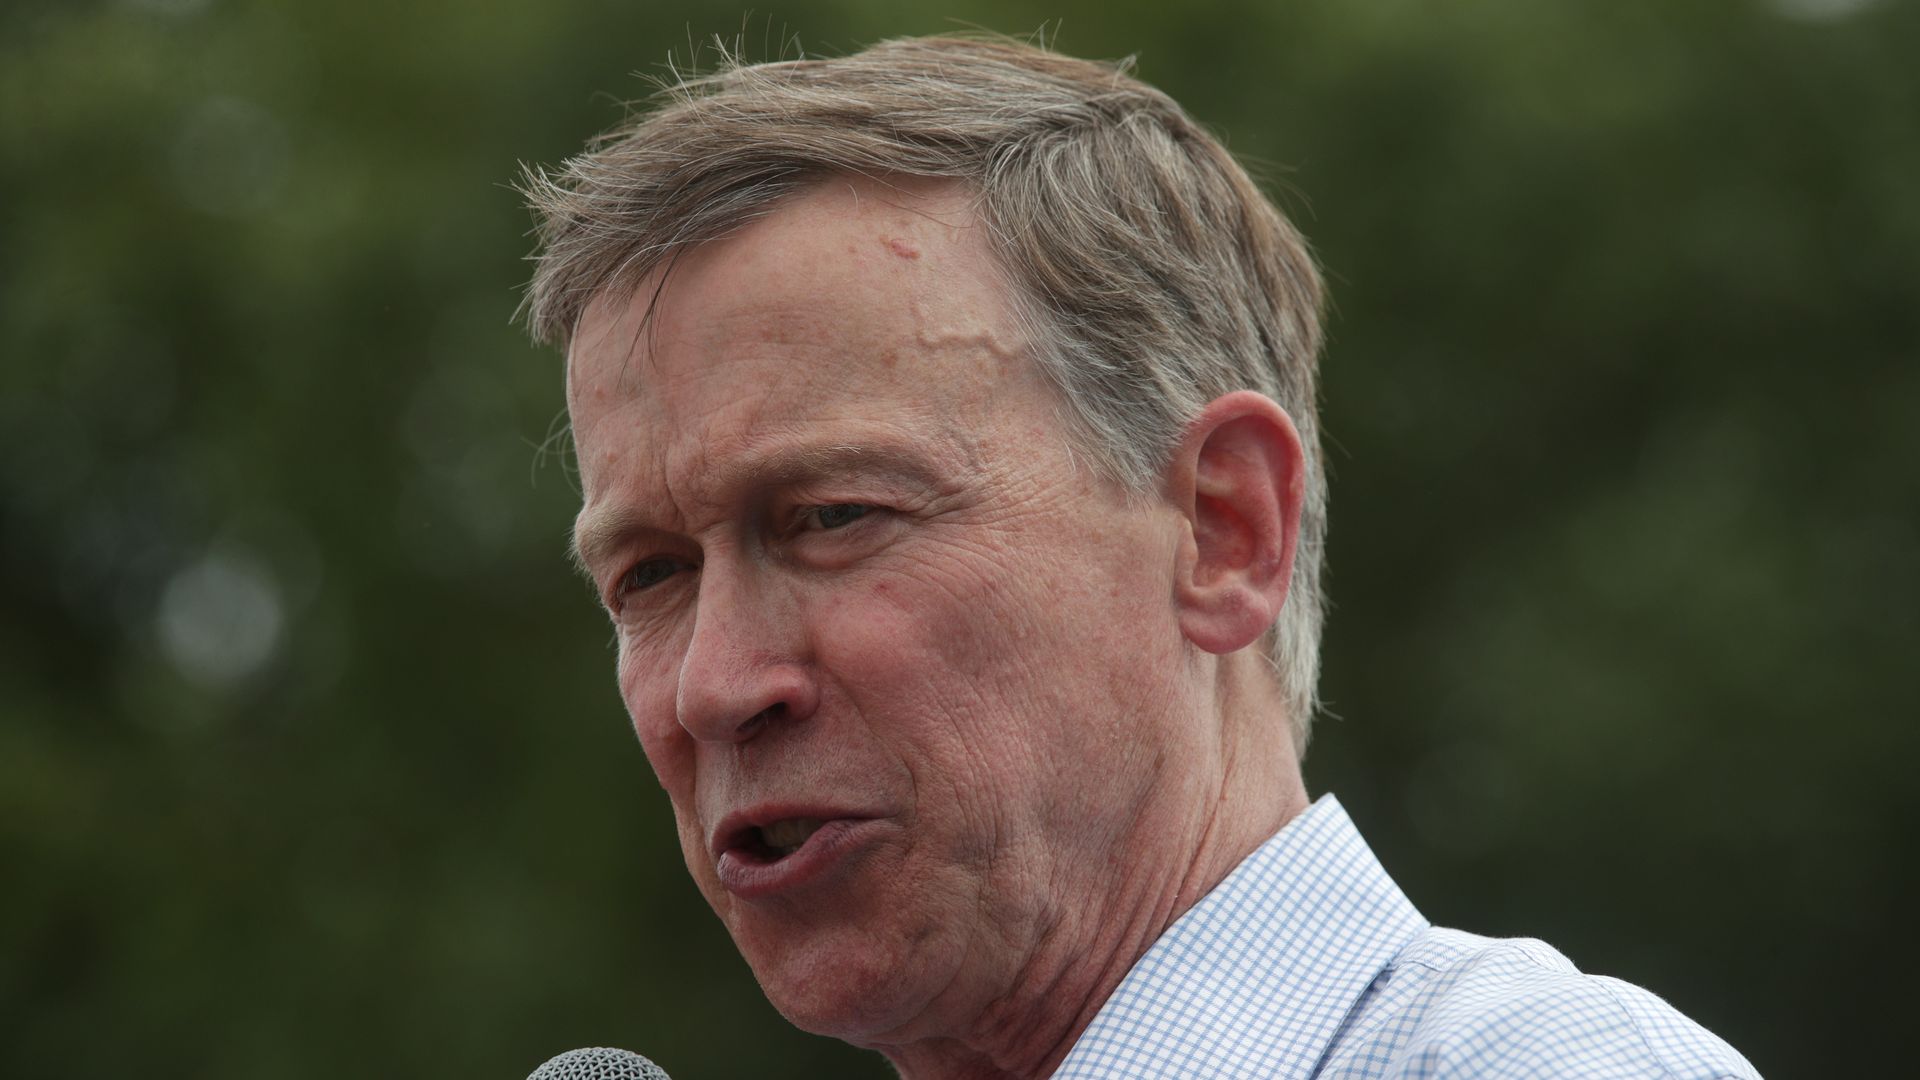  Democratic presidential candidate and former Governor of Colorado John Hickenlooper delivers a campaign speech at the Des Moines Register Political Soapbox